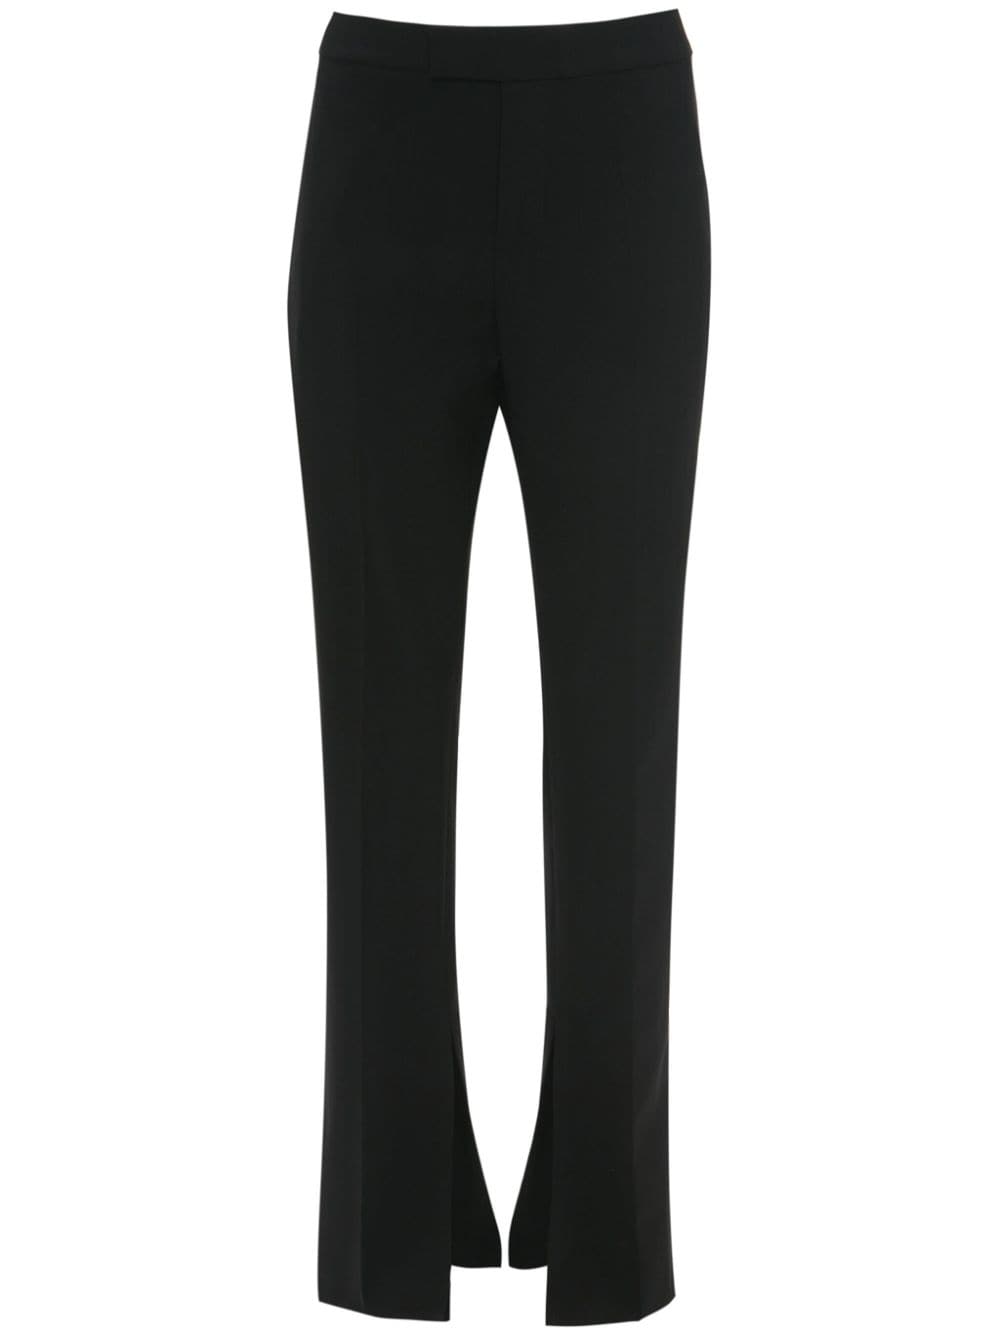 JW ANDERSON Stylish Black Belted Pants for Women